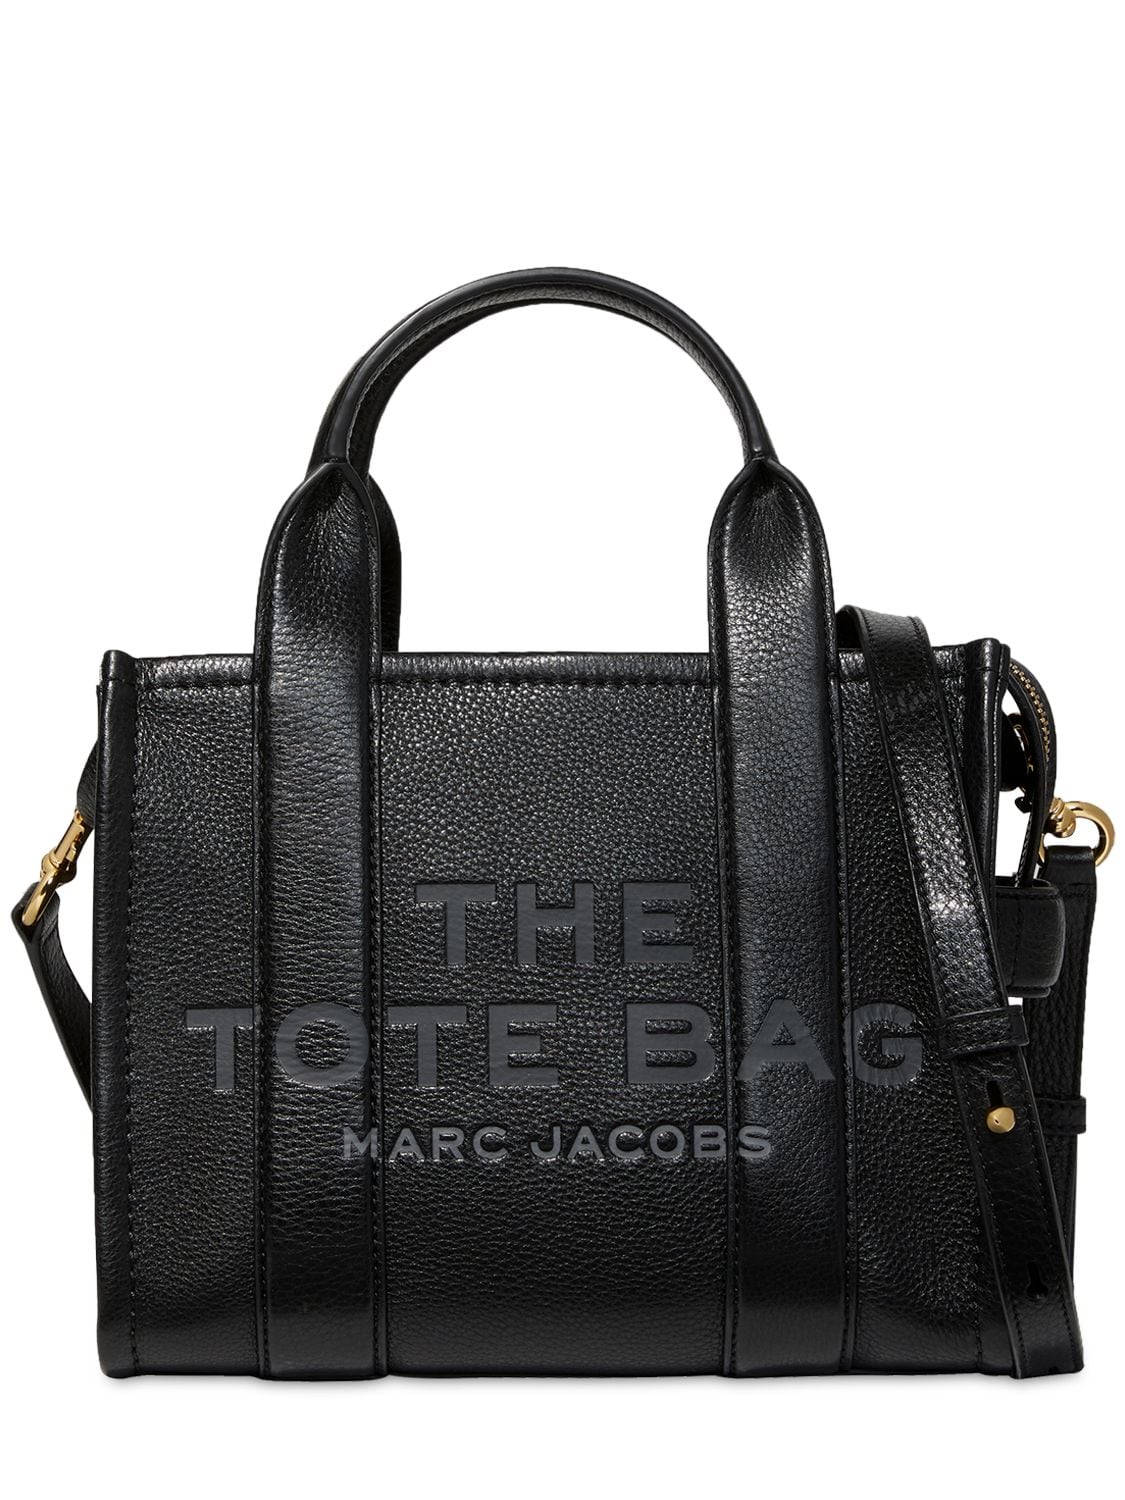 Marc Jacobs The Mini Tote Leather Bag In Black